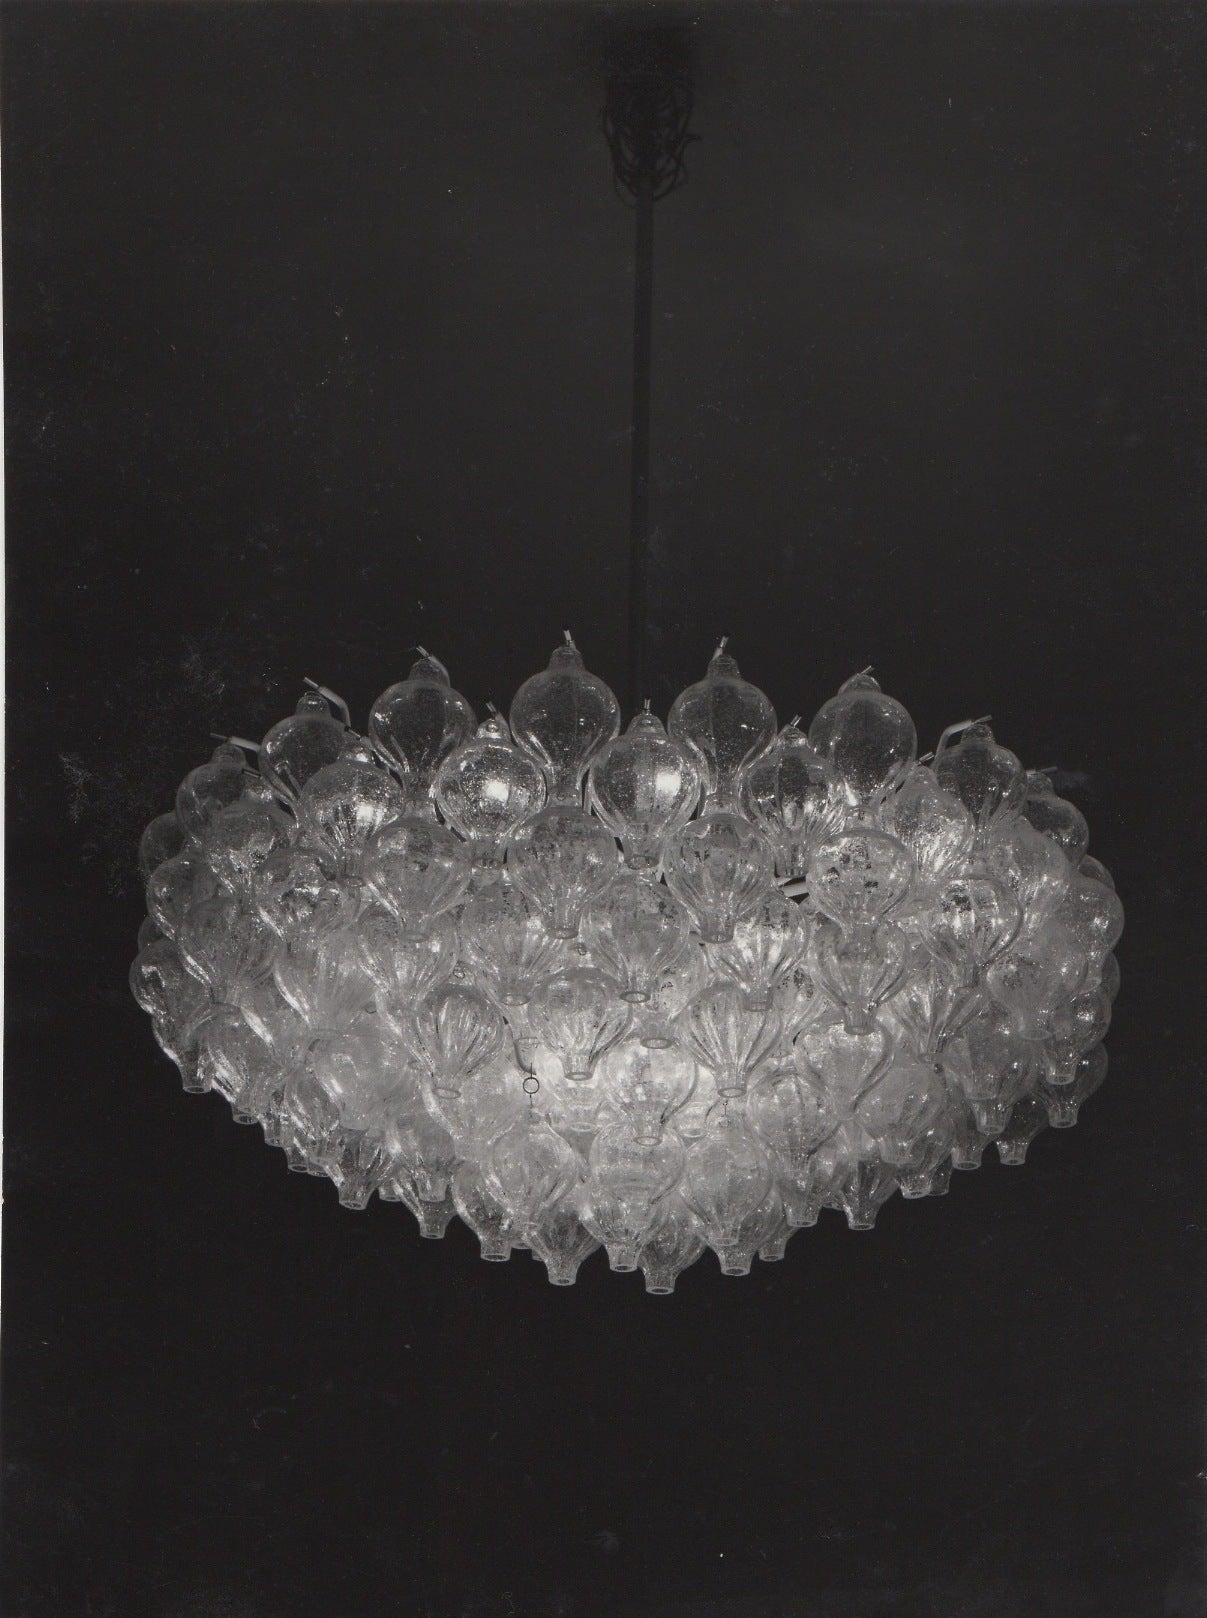 Lucca Chmel (1911-1999) for J. T. KALMAR: Tulip glass Chandelier
Vintage photograph from ca. 1950. Size: 23 x 17,2 cm.

Lucca Chmel (1911-1999) was an important Austrian photographer. She is
very famous for her architectural photography and